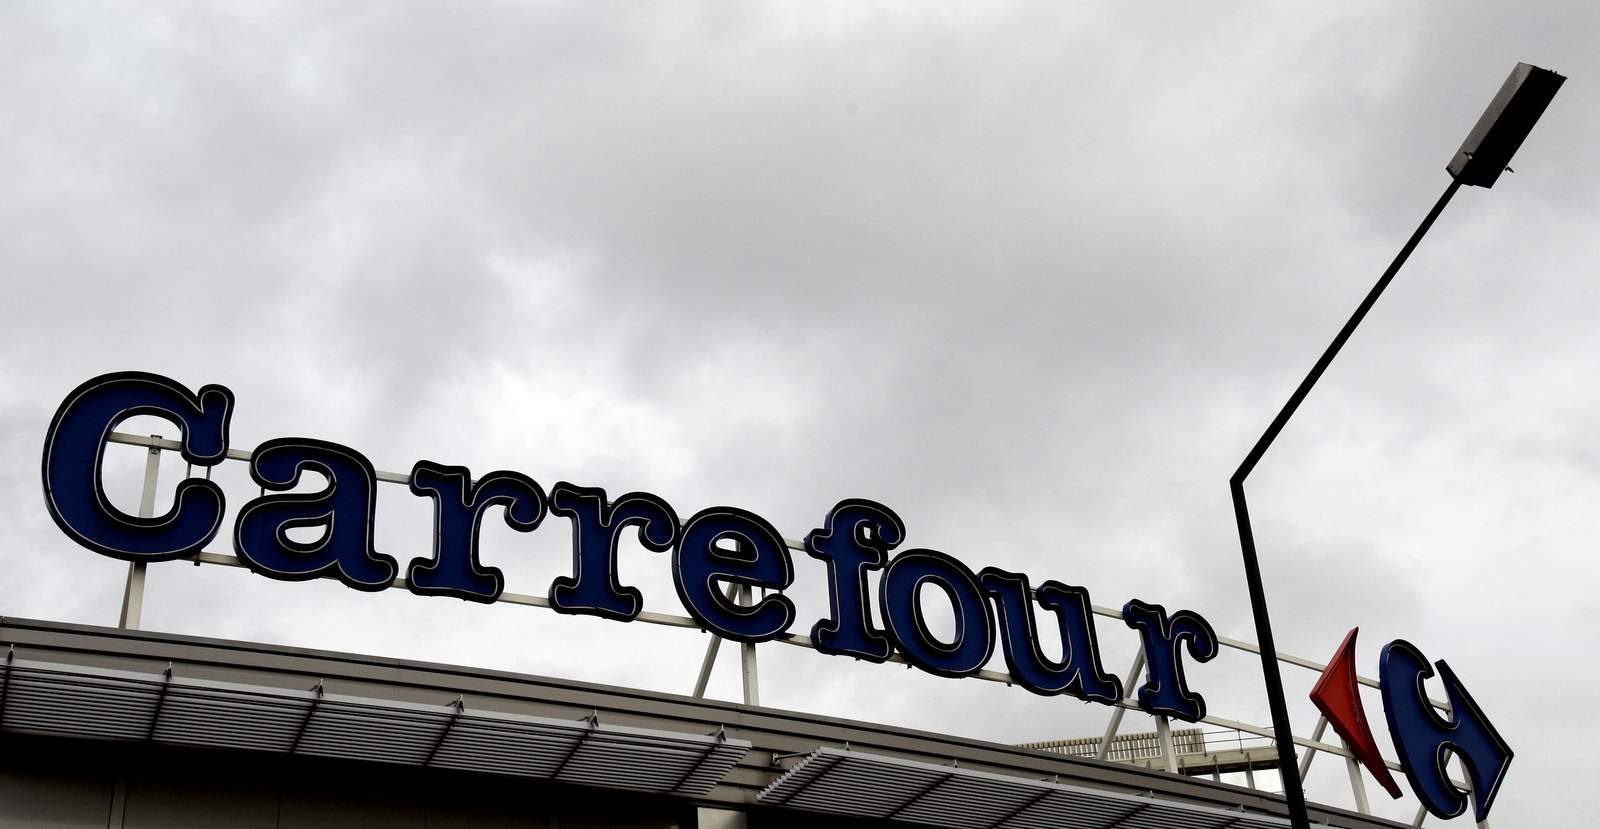 France opposes foreign takeover offer for supermarket chain